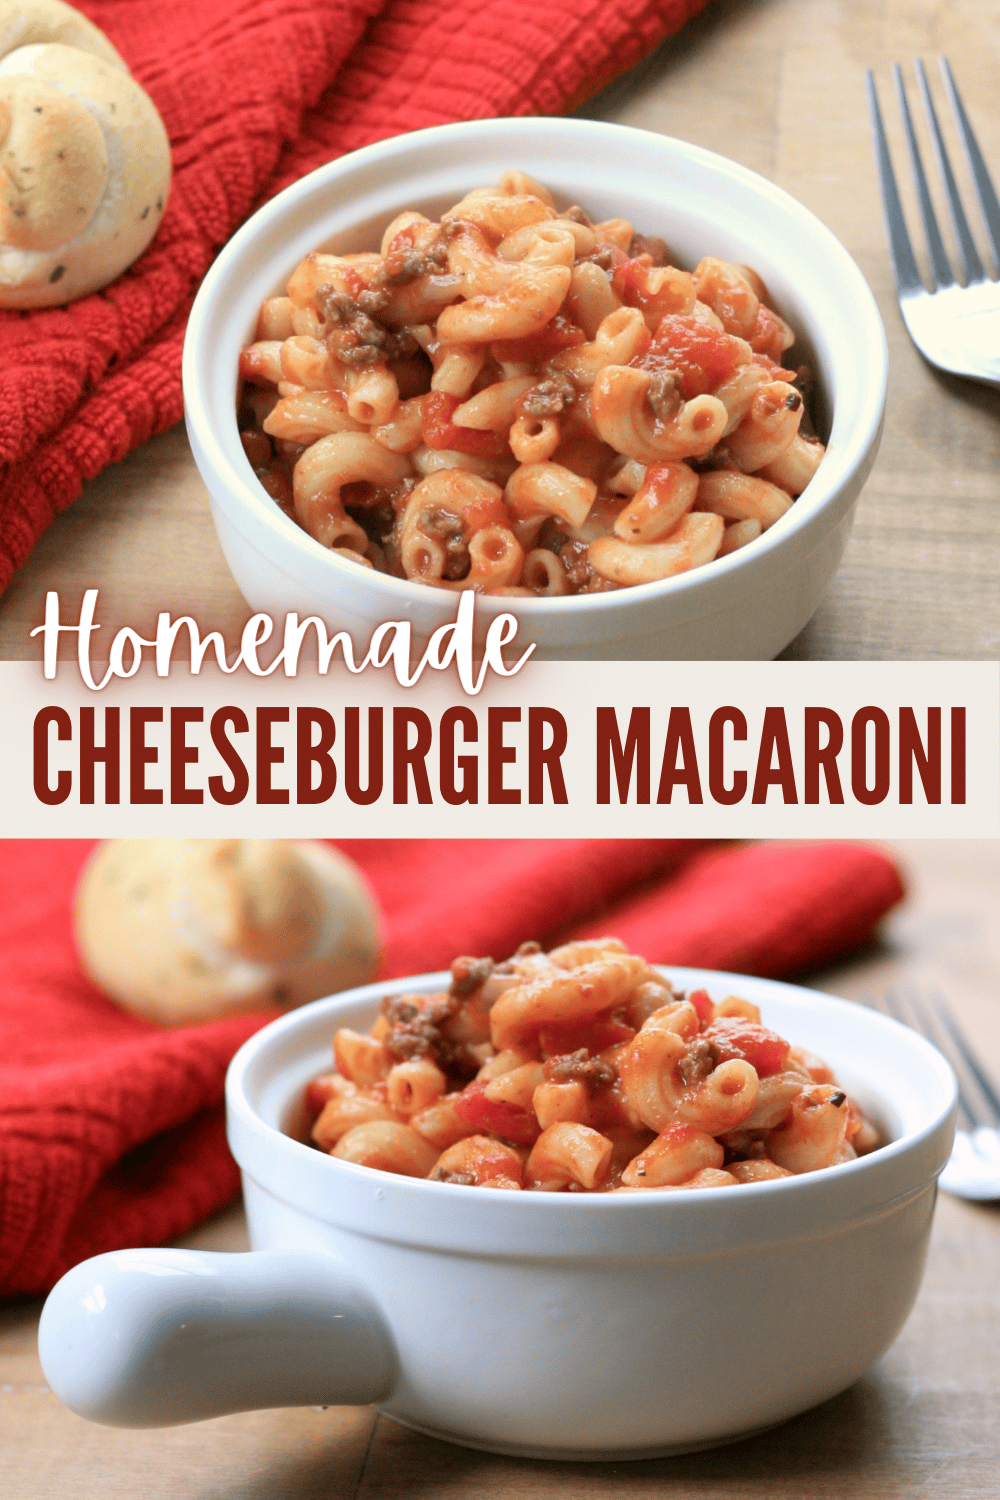 This homemade cheeseburger macaroni is so easy to make and is the perfect weeknight dinner! It's flavorful and will be a hit with the family! #homemadecheeseburgermacaroni #cheeseburger #macaroni #dinnerrecipe via @wondermomwannab